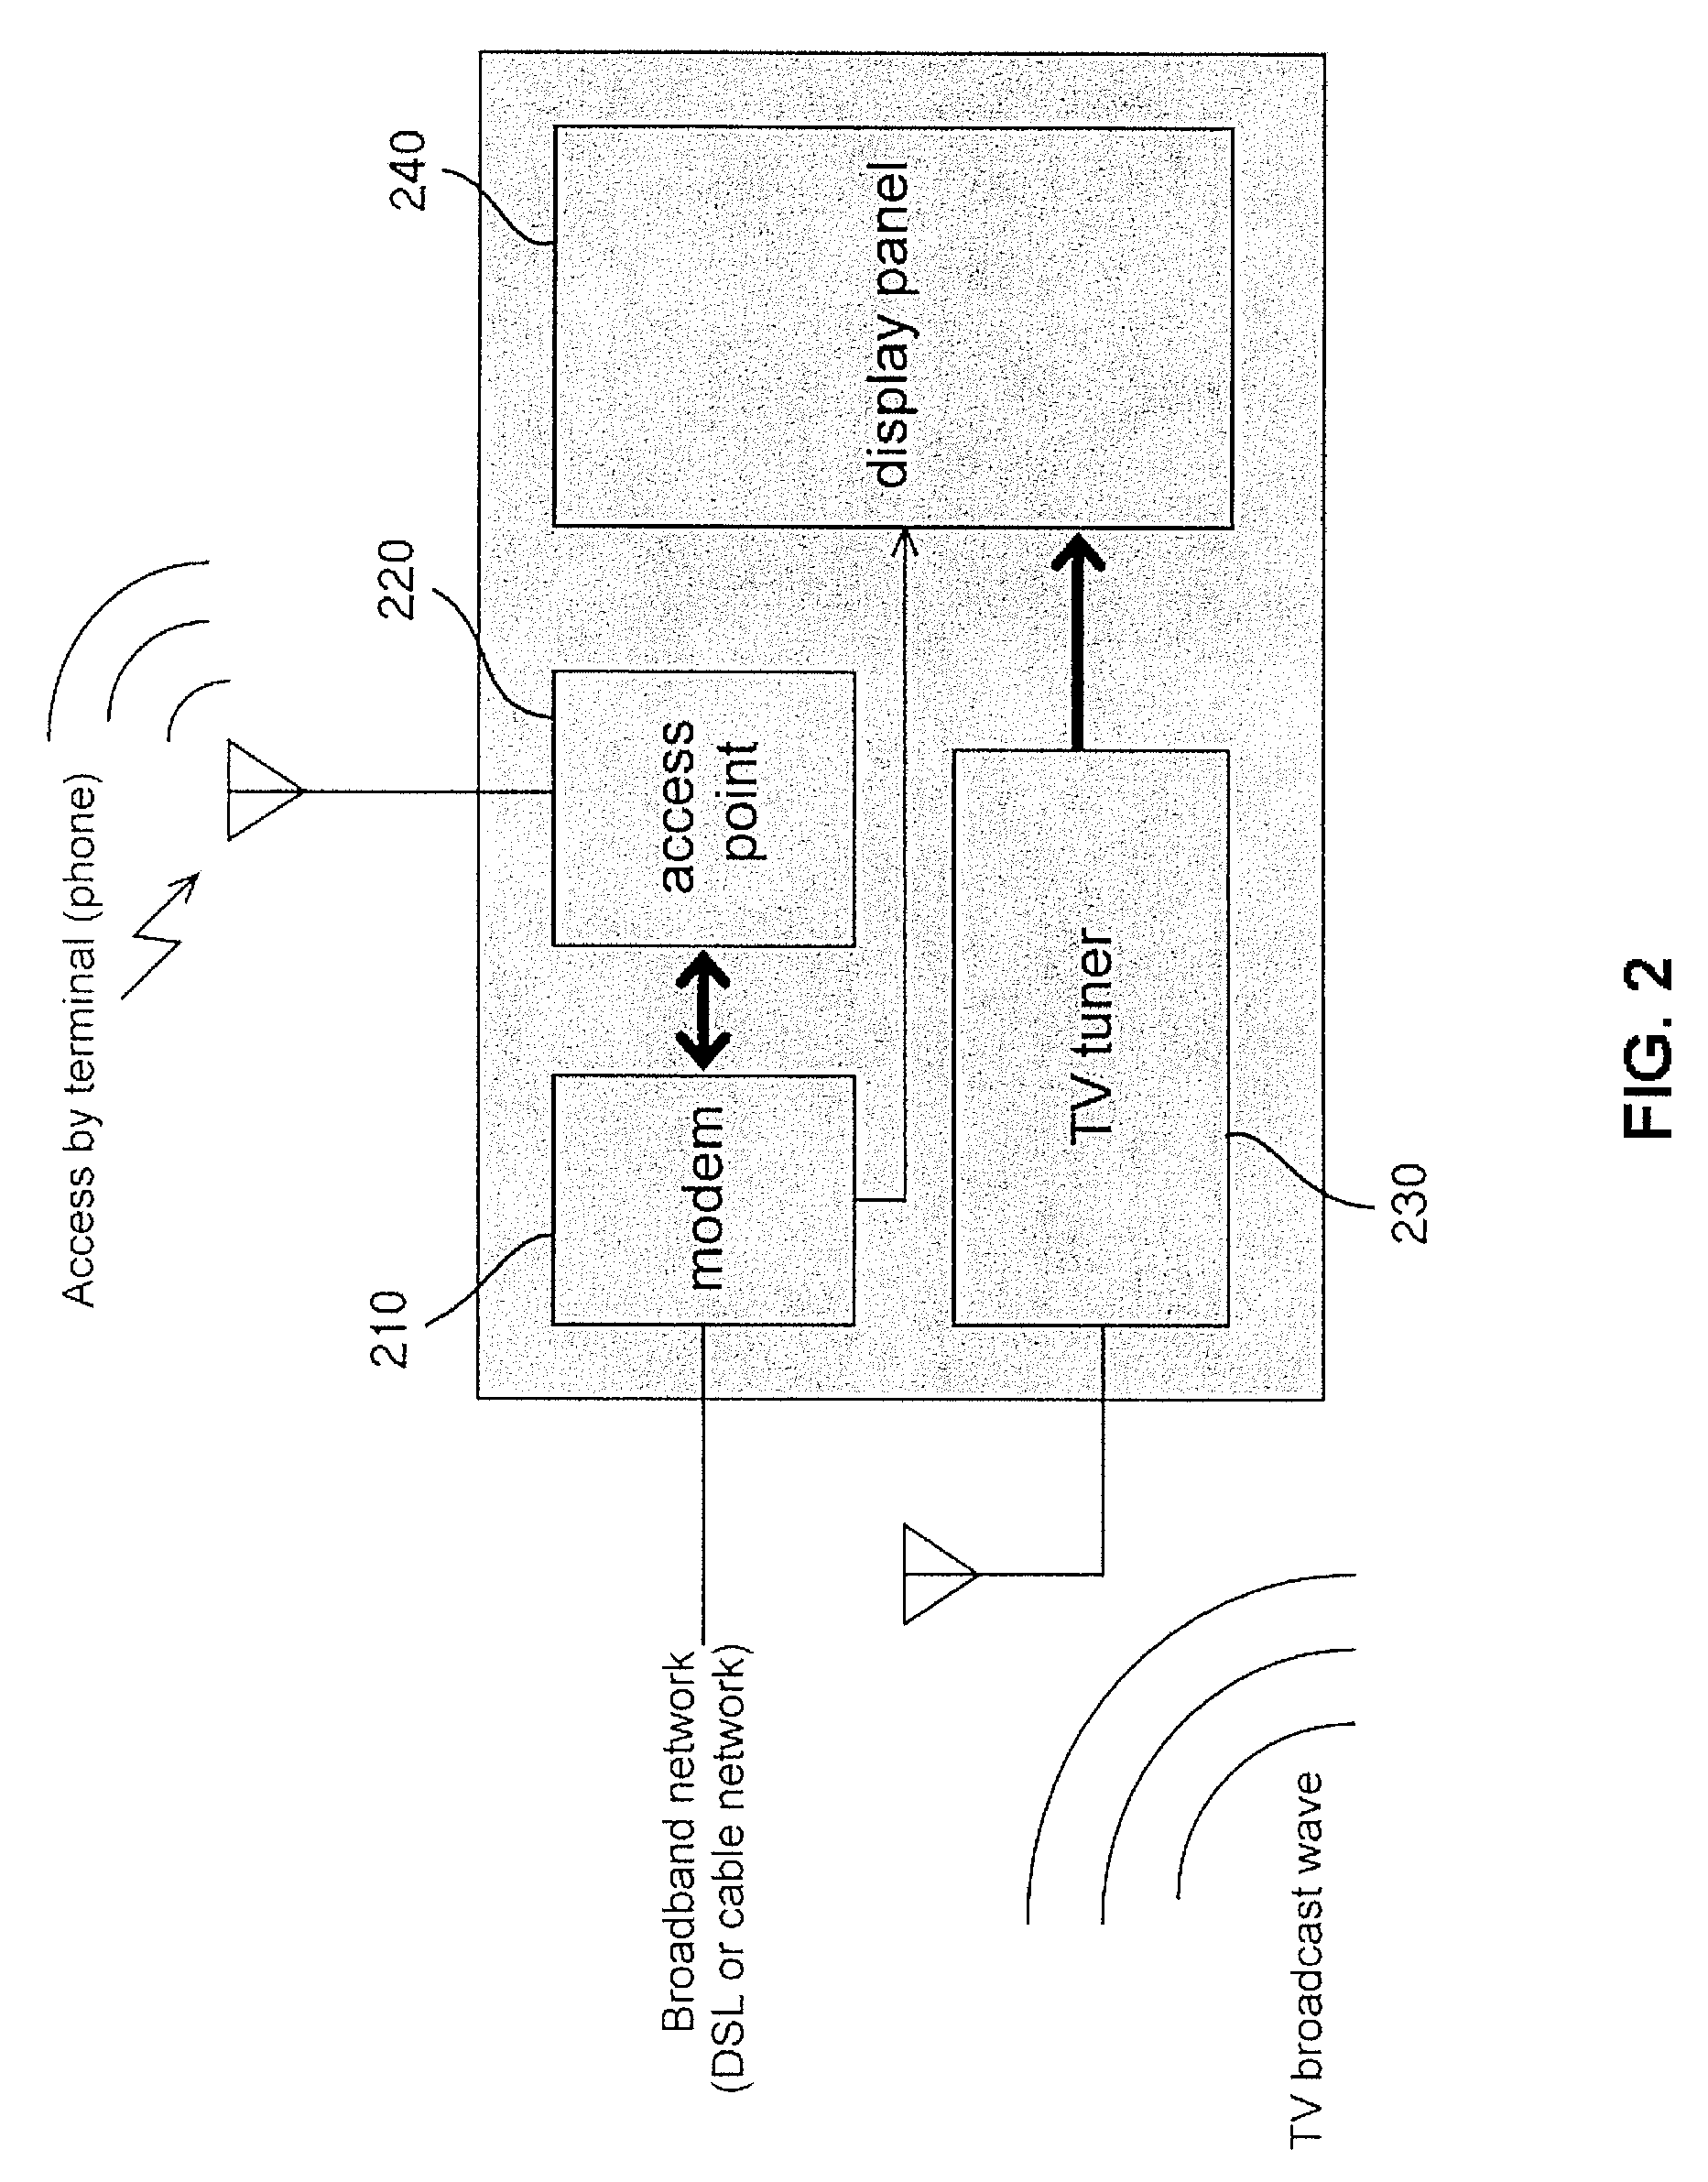 Method and system for providing wireless LAN service using rental digital television